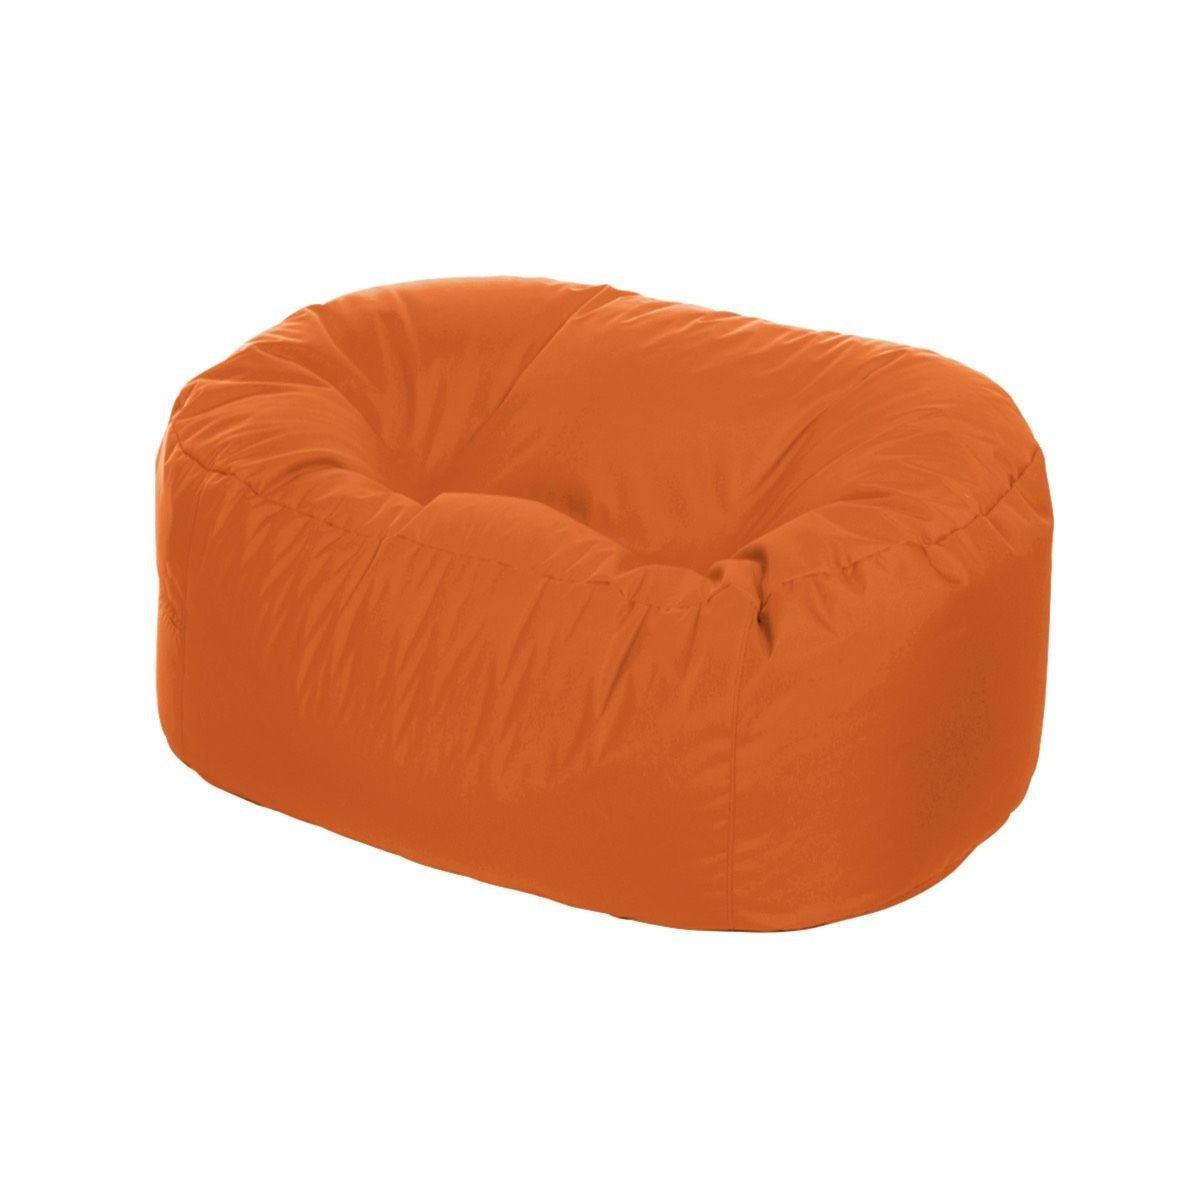 Primary Bench Bean Bag, Encourage paired work with the primary bench bean bag. The Primary Bench Bean Bag is large enough for 2 children making this the perfect addition to any reading corner or group work corner. Being firmer makes this design functional and space efficient. Our Indoor/Outdoor bean bags are made from a soft, shower-proof and UV Resistant material - meaning the sun and rain won't damage them! Although perfectly suited for use outside, the Indoor/Outdoor bean bags are very comfortable and lo